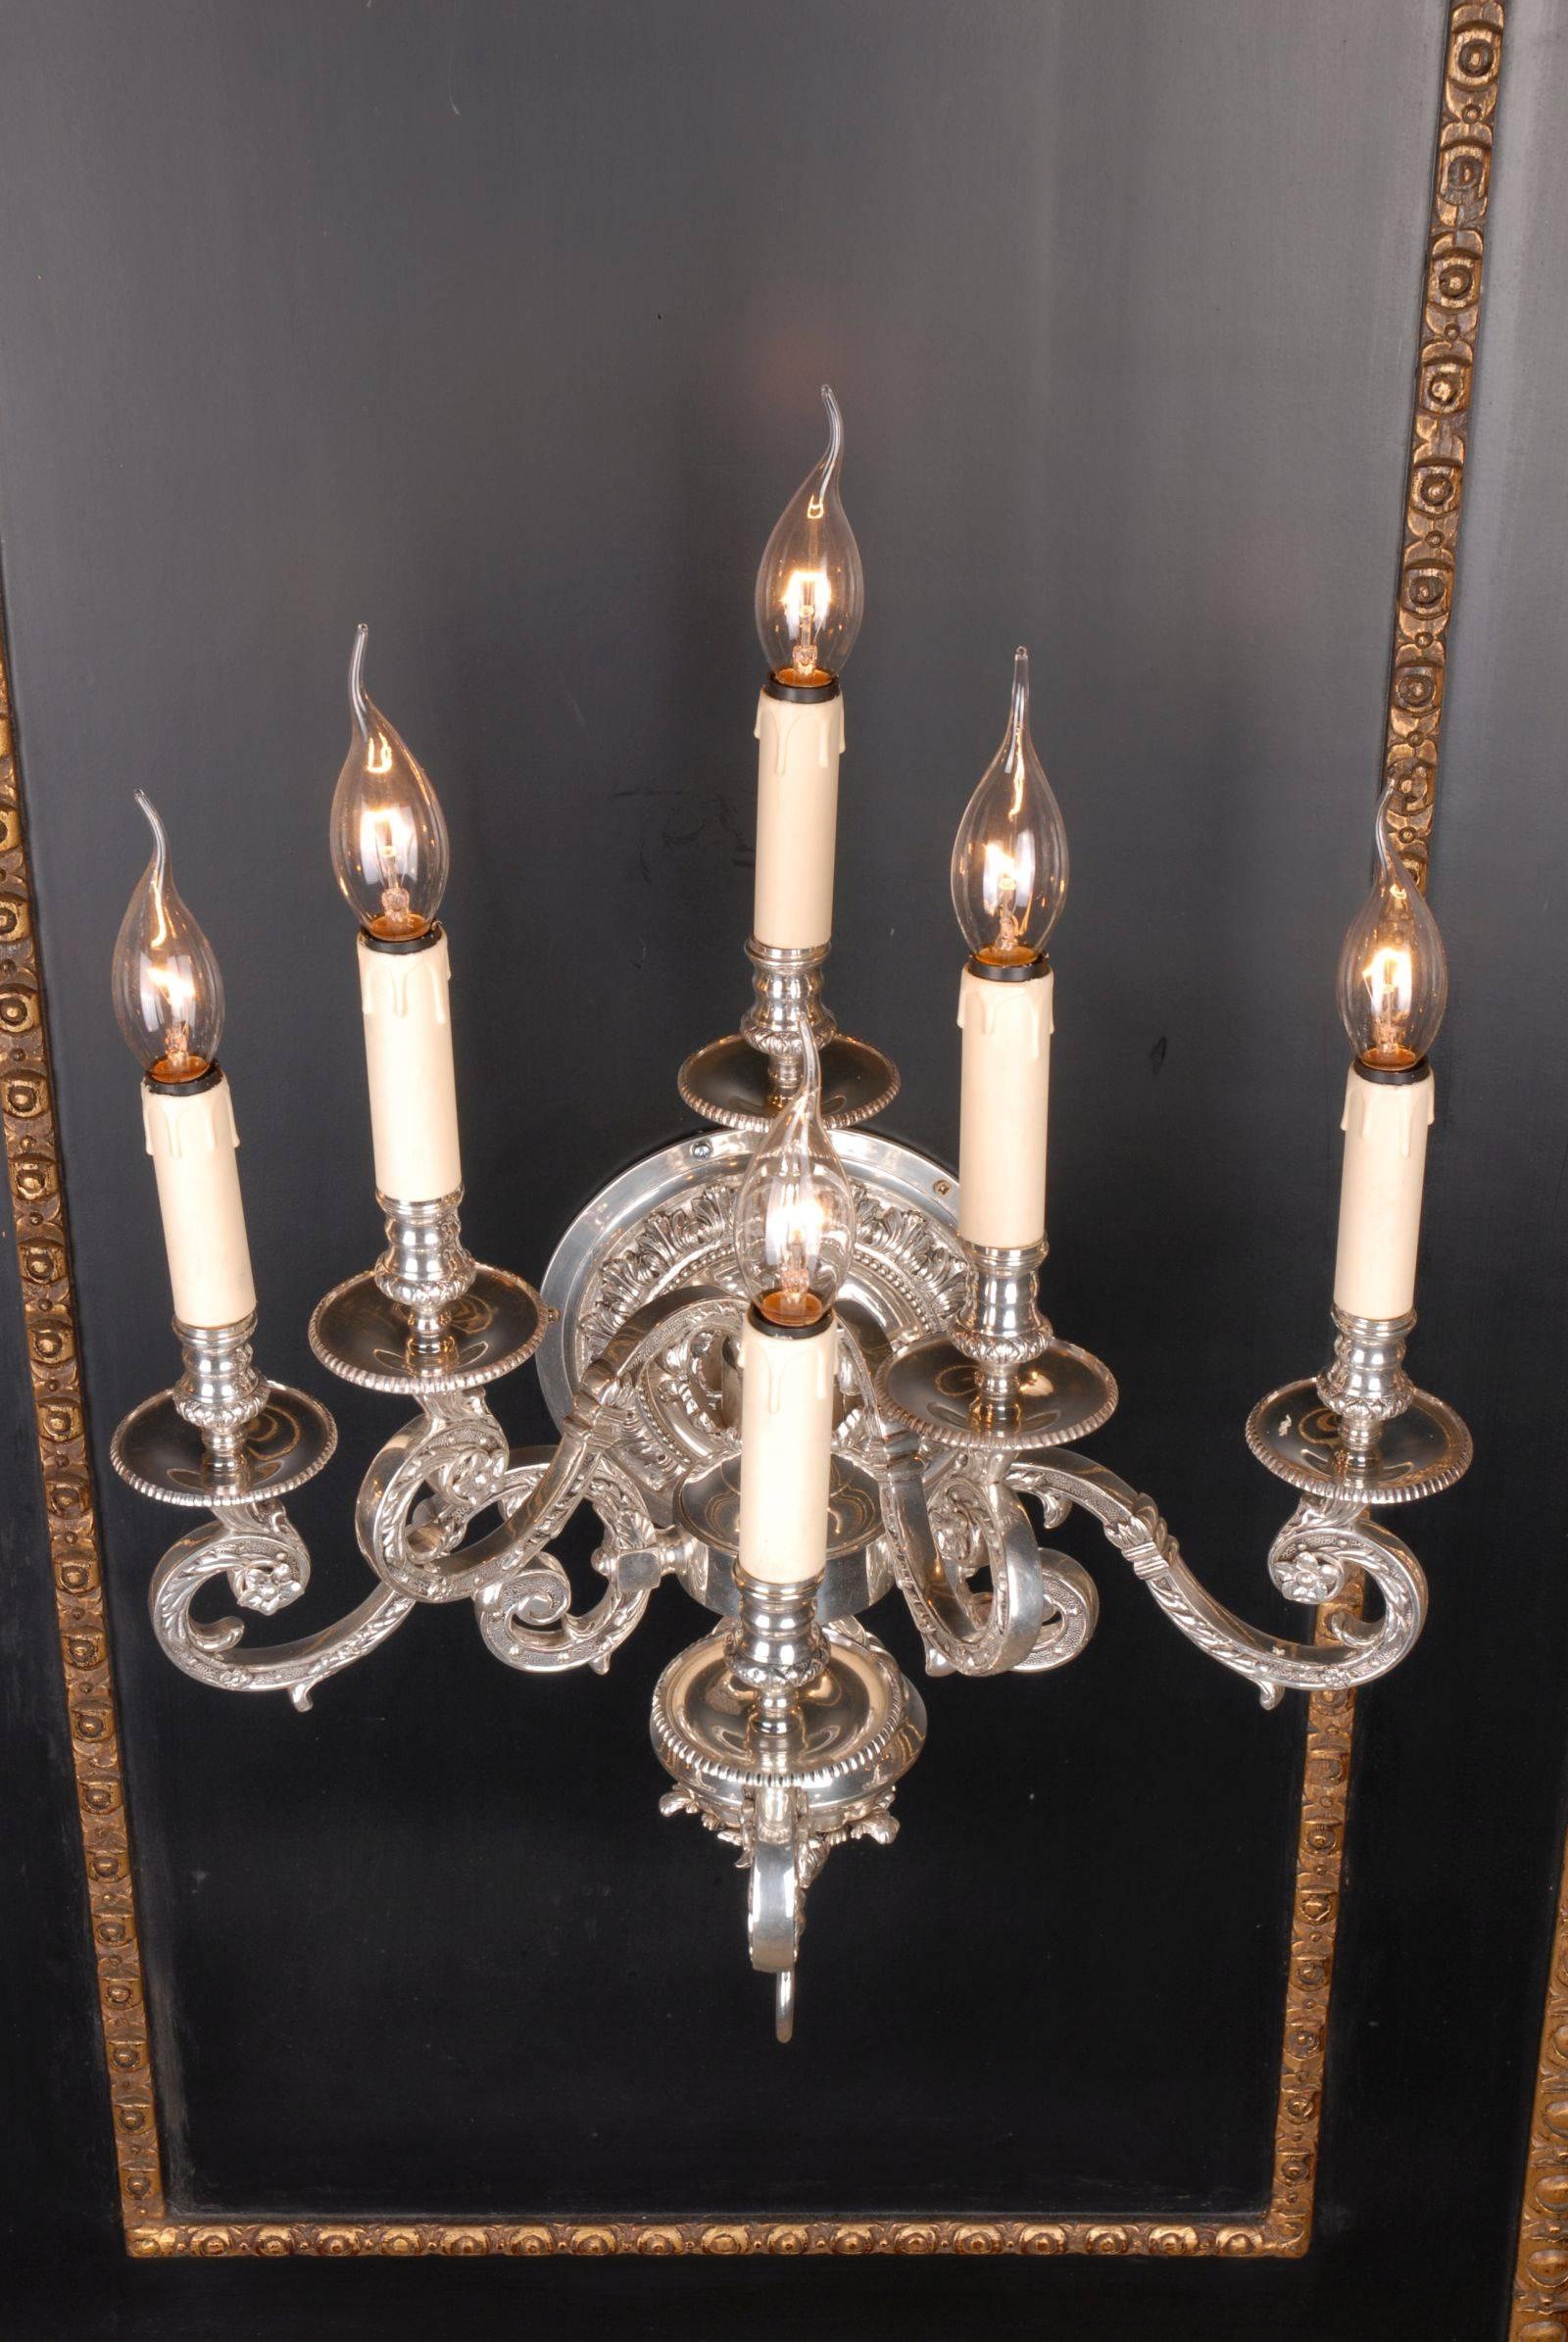 Baroque wall light in Louis XIV style.
Six flamed light corpus. Polished and engraved bronze. Round, reliefed, wall-shield. There from, six light arms composed of spirals.

(F-Ra-71).